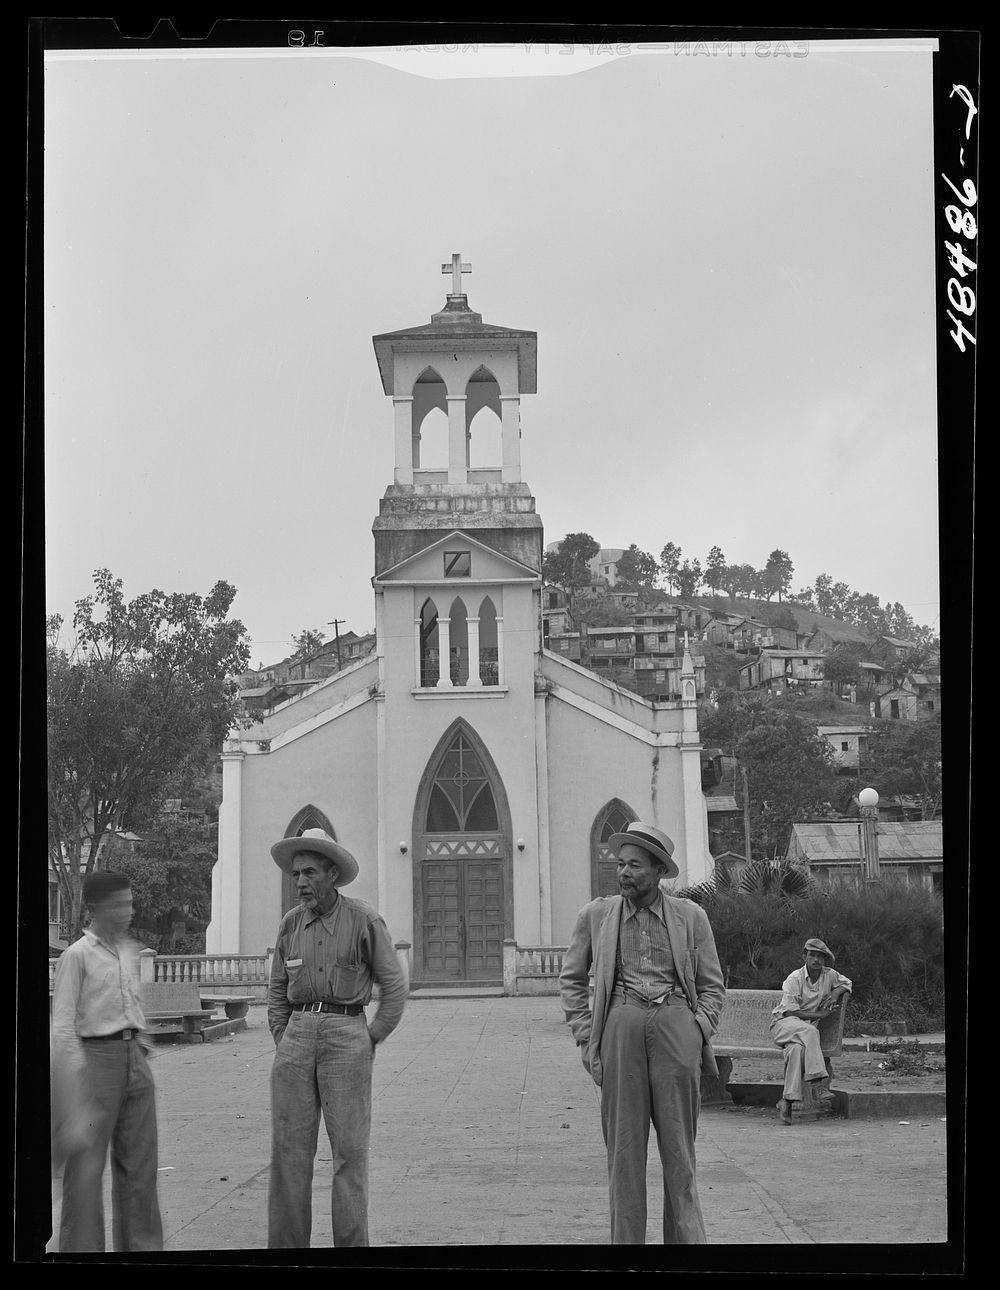 [Untitled photo, possibly related to: Orocovis, Puerto Rico. The plaza]. Sourced from the Library of Congress.